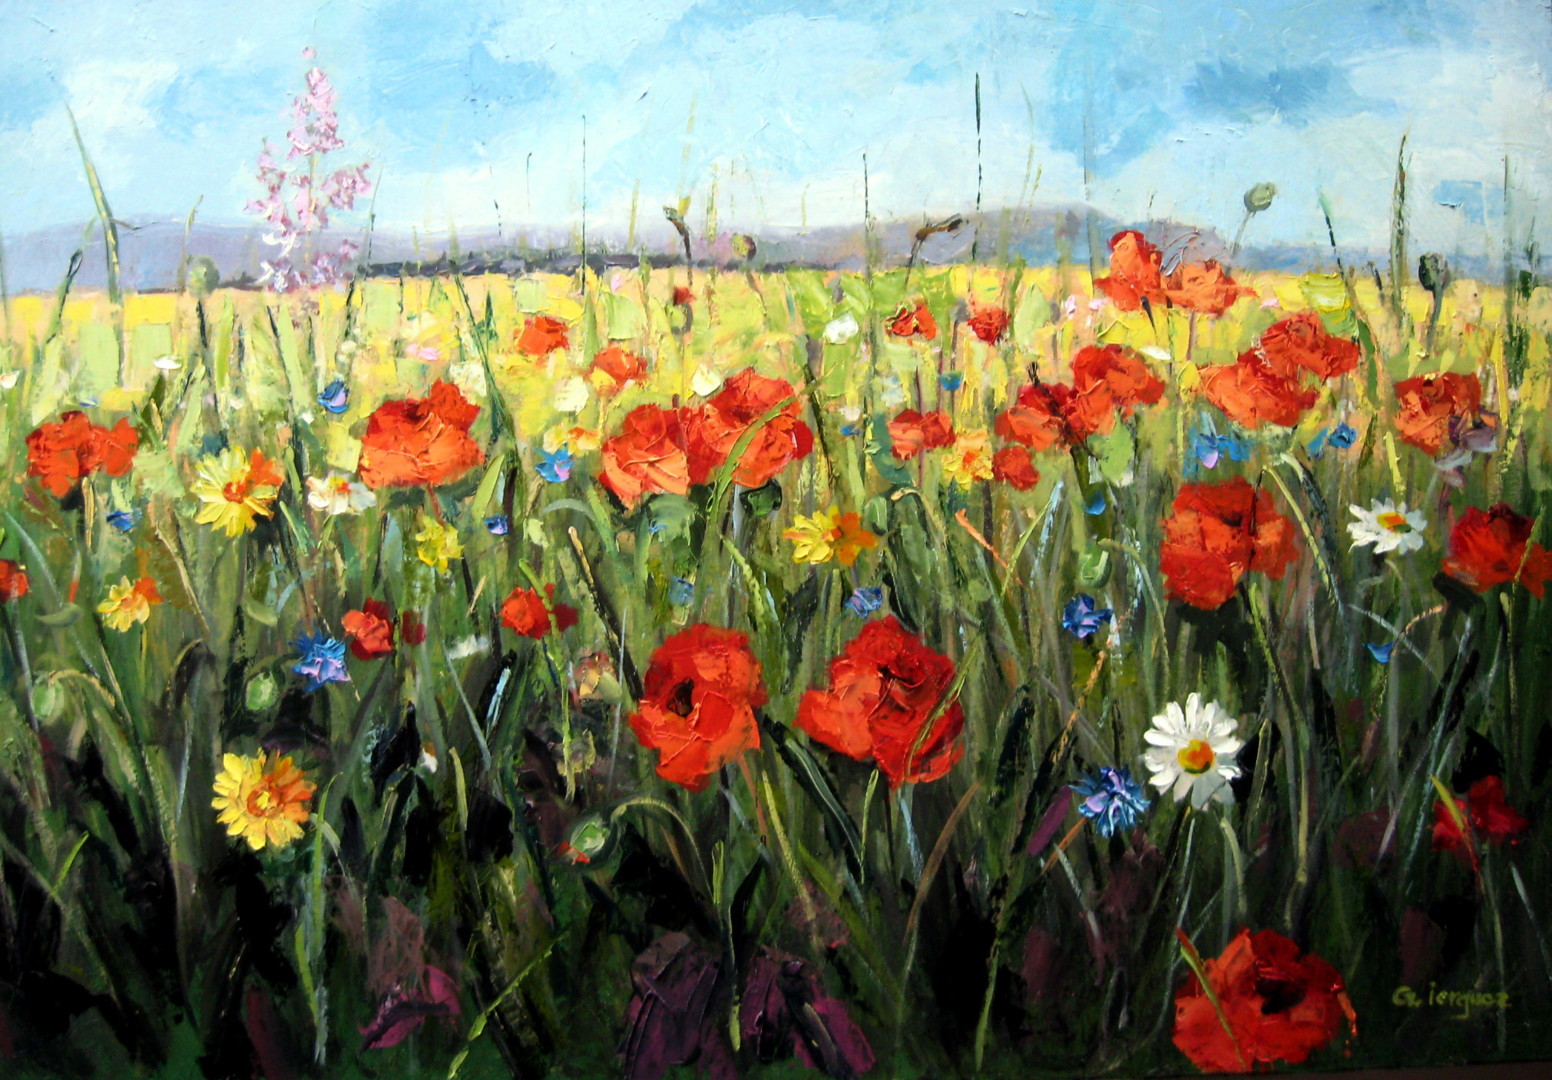 field-of-flowers-painting-by-gheorghe-iergucz-artmajeur